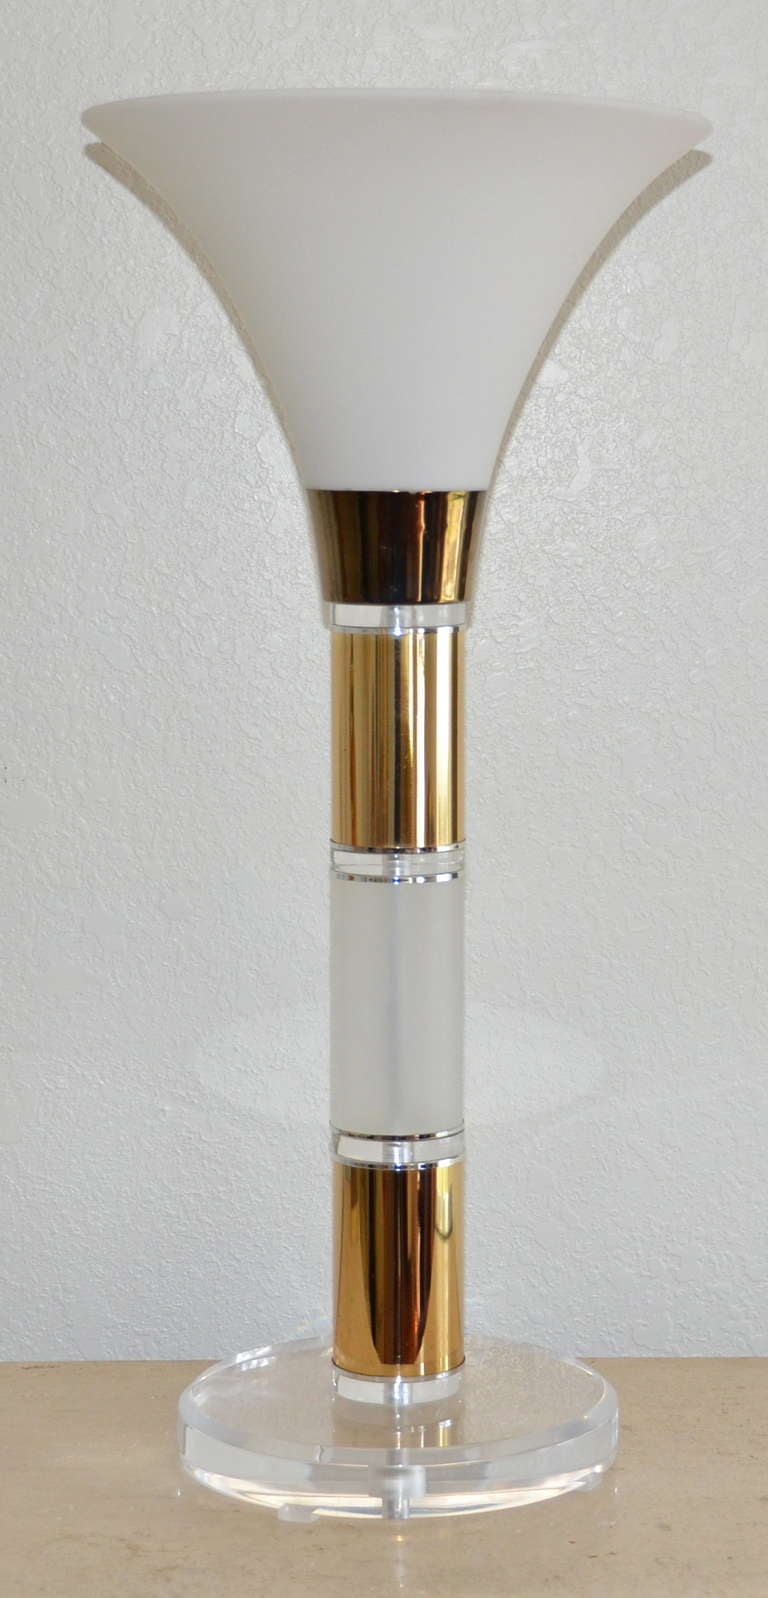 This is a large cool wonderful Mid-Century 1960s modern clear and frosted Lucite and brass banded Lamp with a frosted urn shape glass shade and clear Lucite base-large-30 in H. A very solid construction and nicely detailed. It creates a glowing